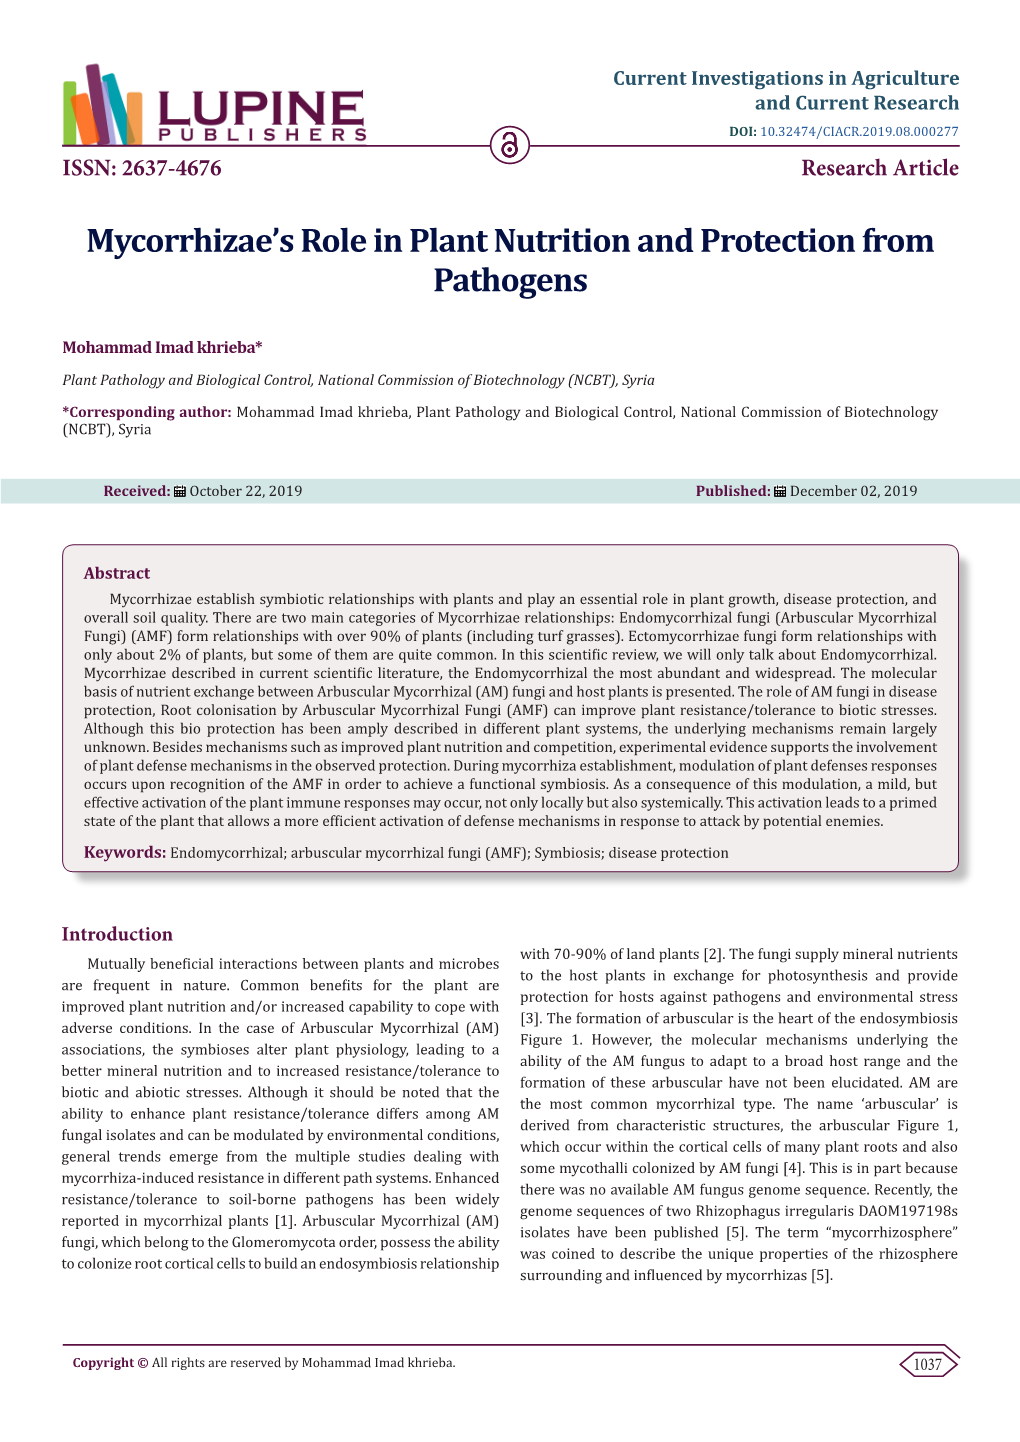 Mycorrhizae's Role in Plant Nutrition and Protection from Pathogens